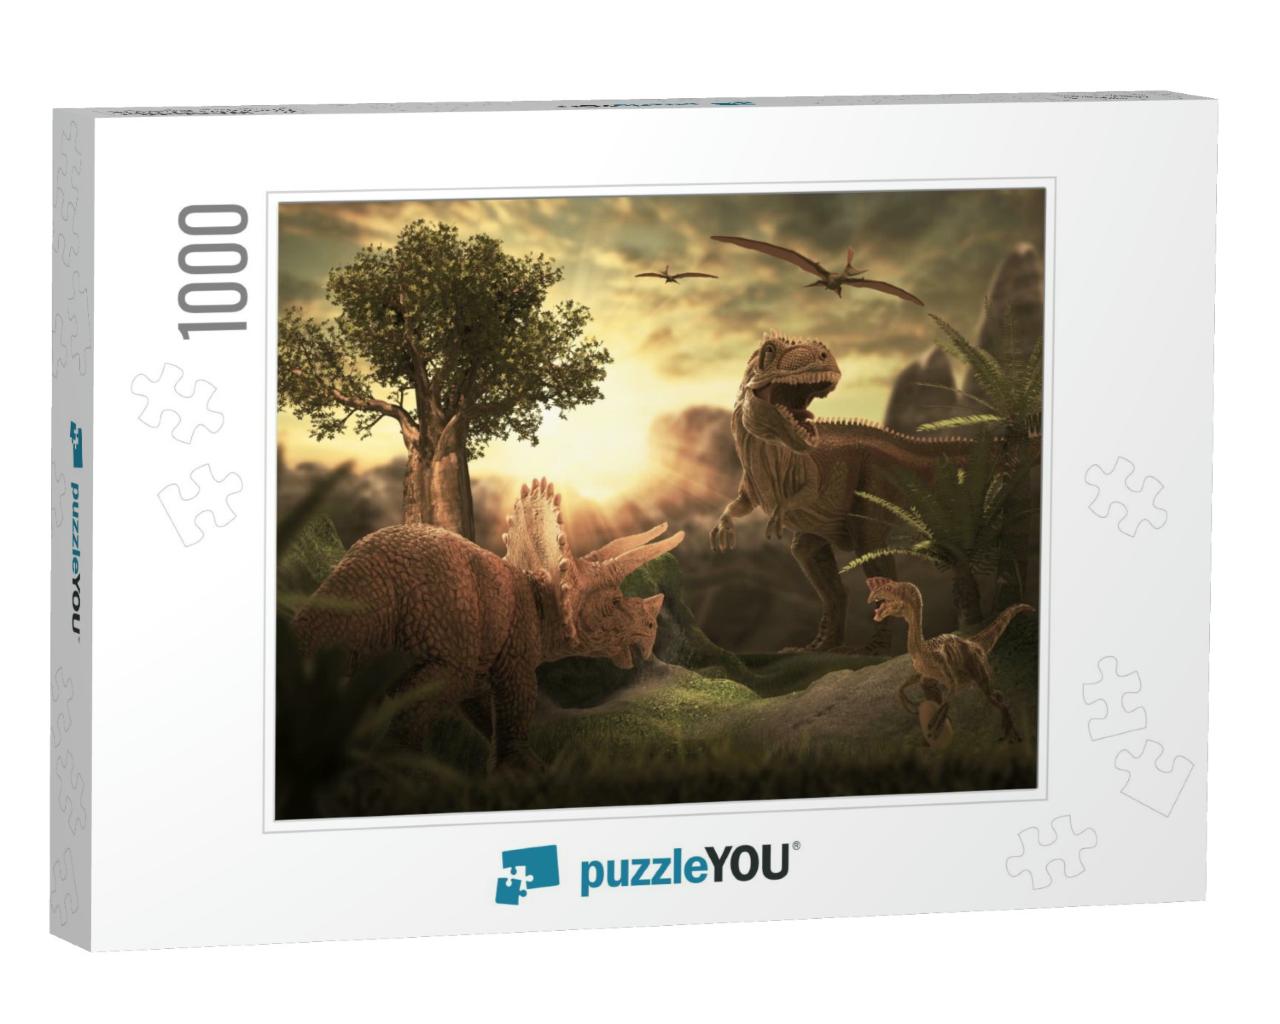 Scene of the Giant Dinosaur Destroy the Park. 3D Render P... Jigsaw Puzzle with 1000 pieces